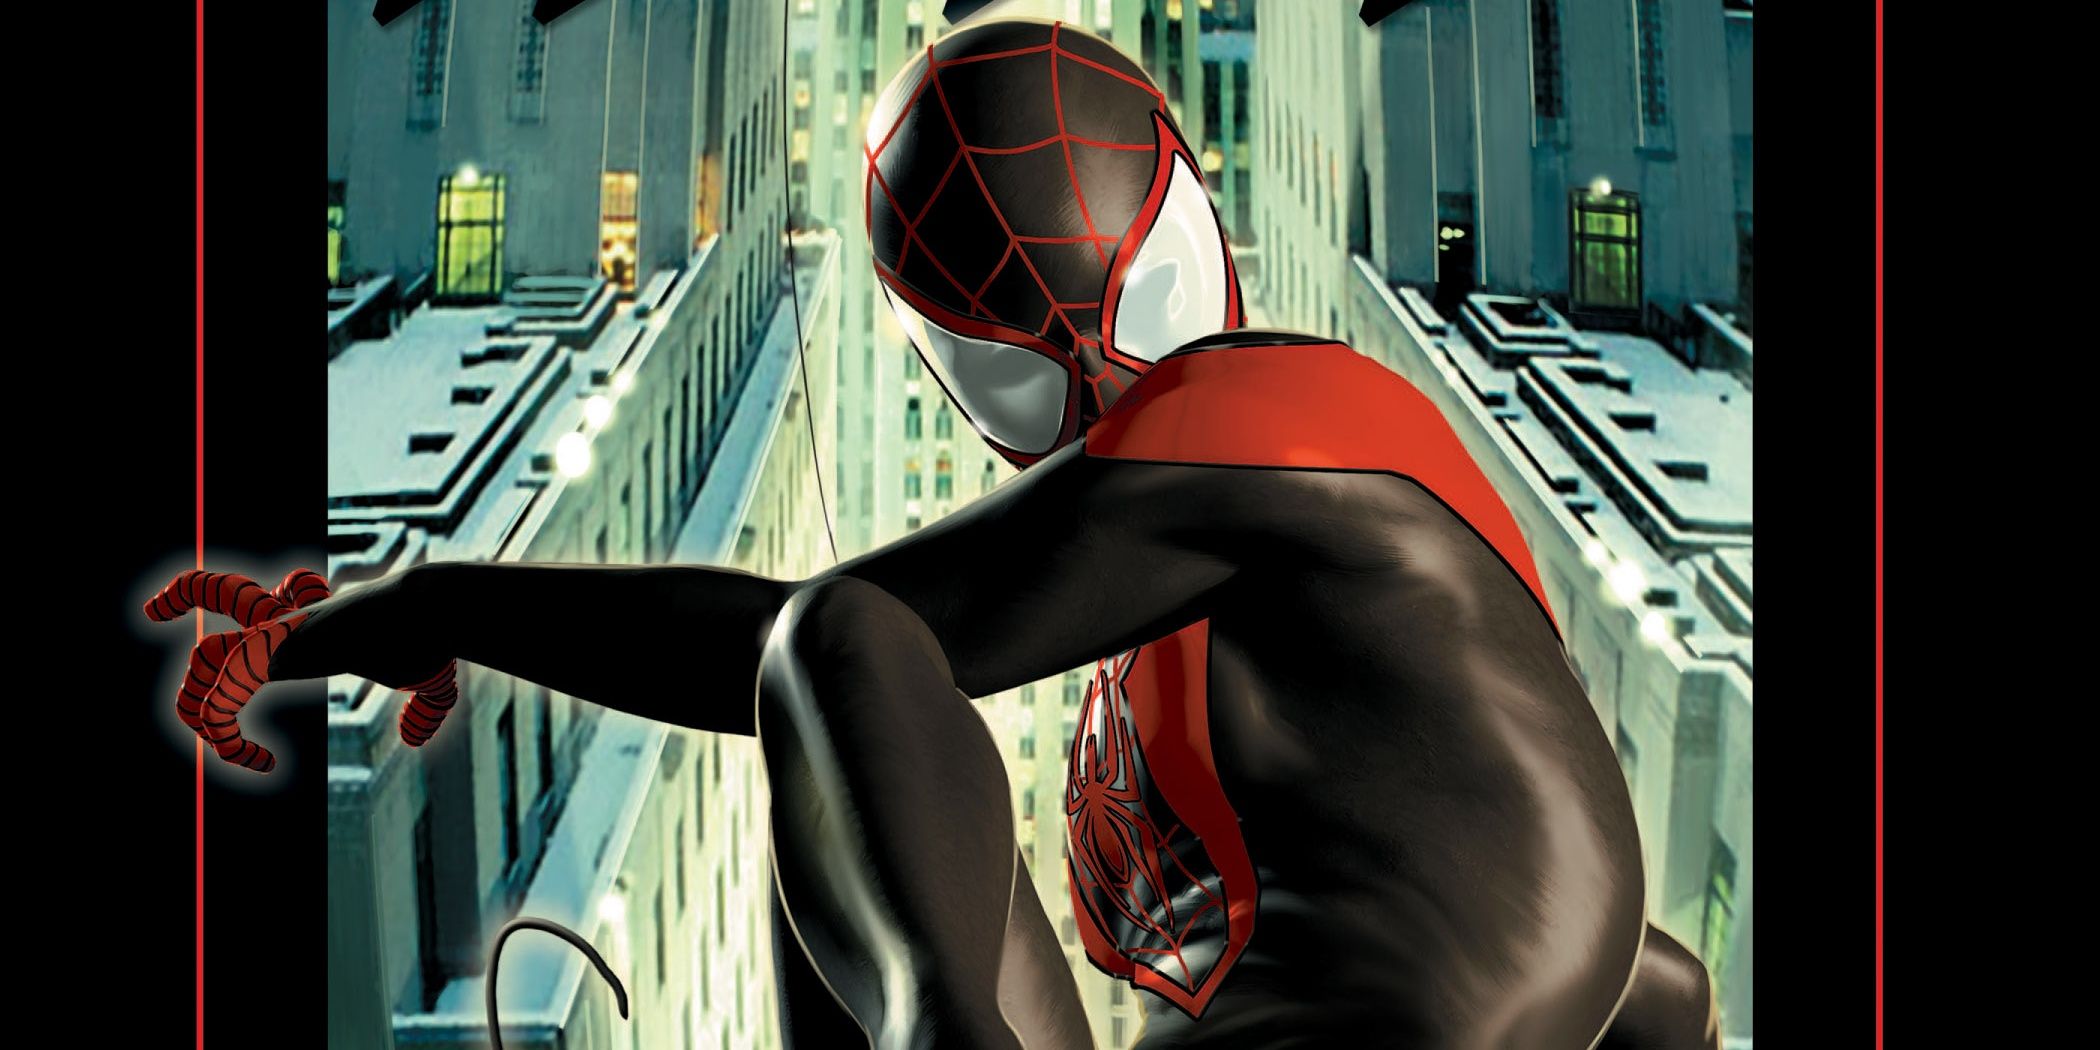 Miles Morales on the cover of Marvel's Ultimate Spider-Man series